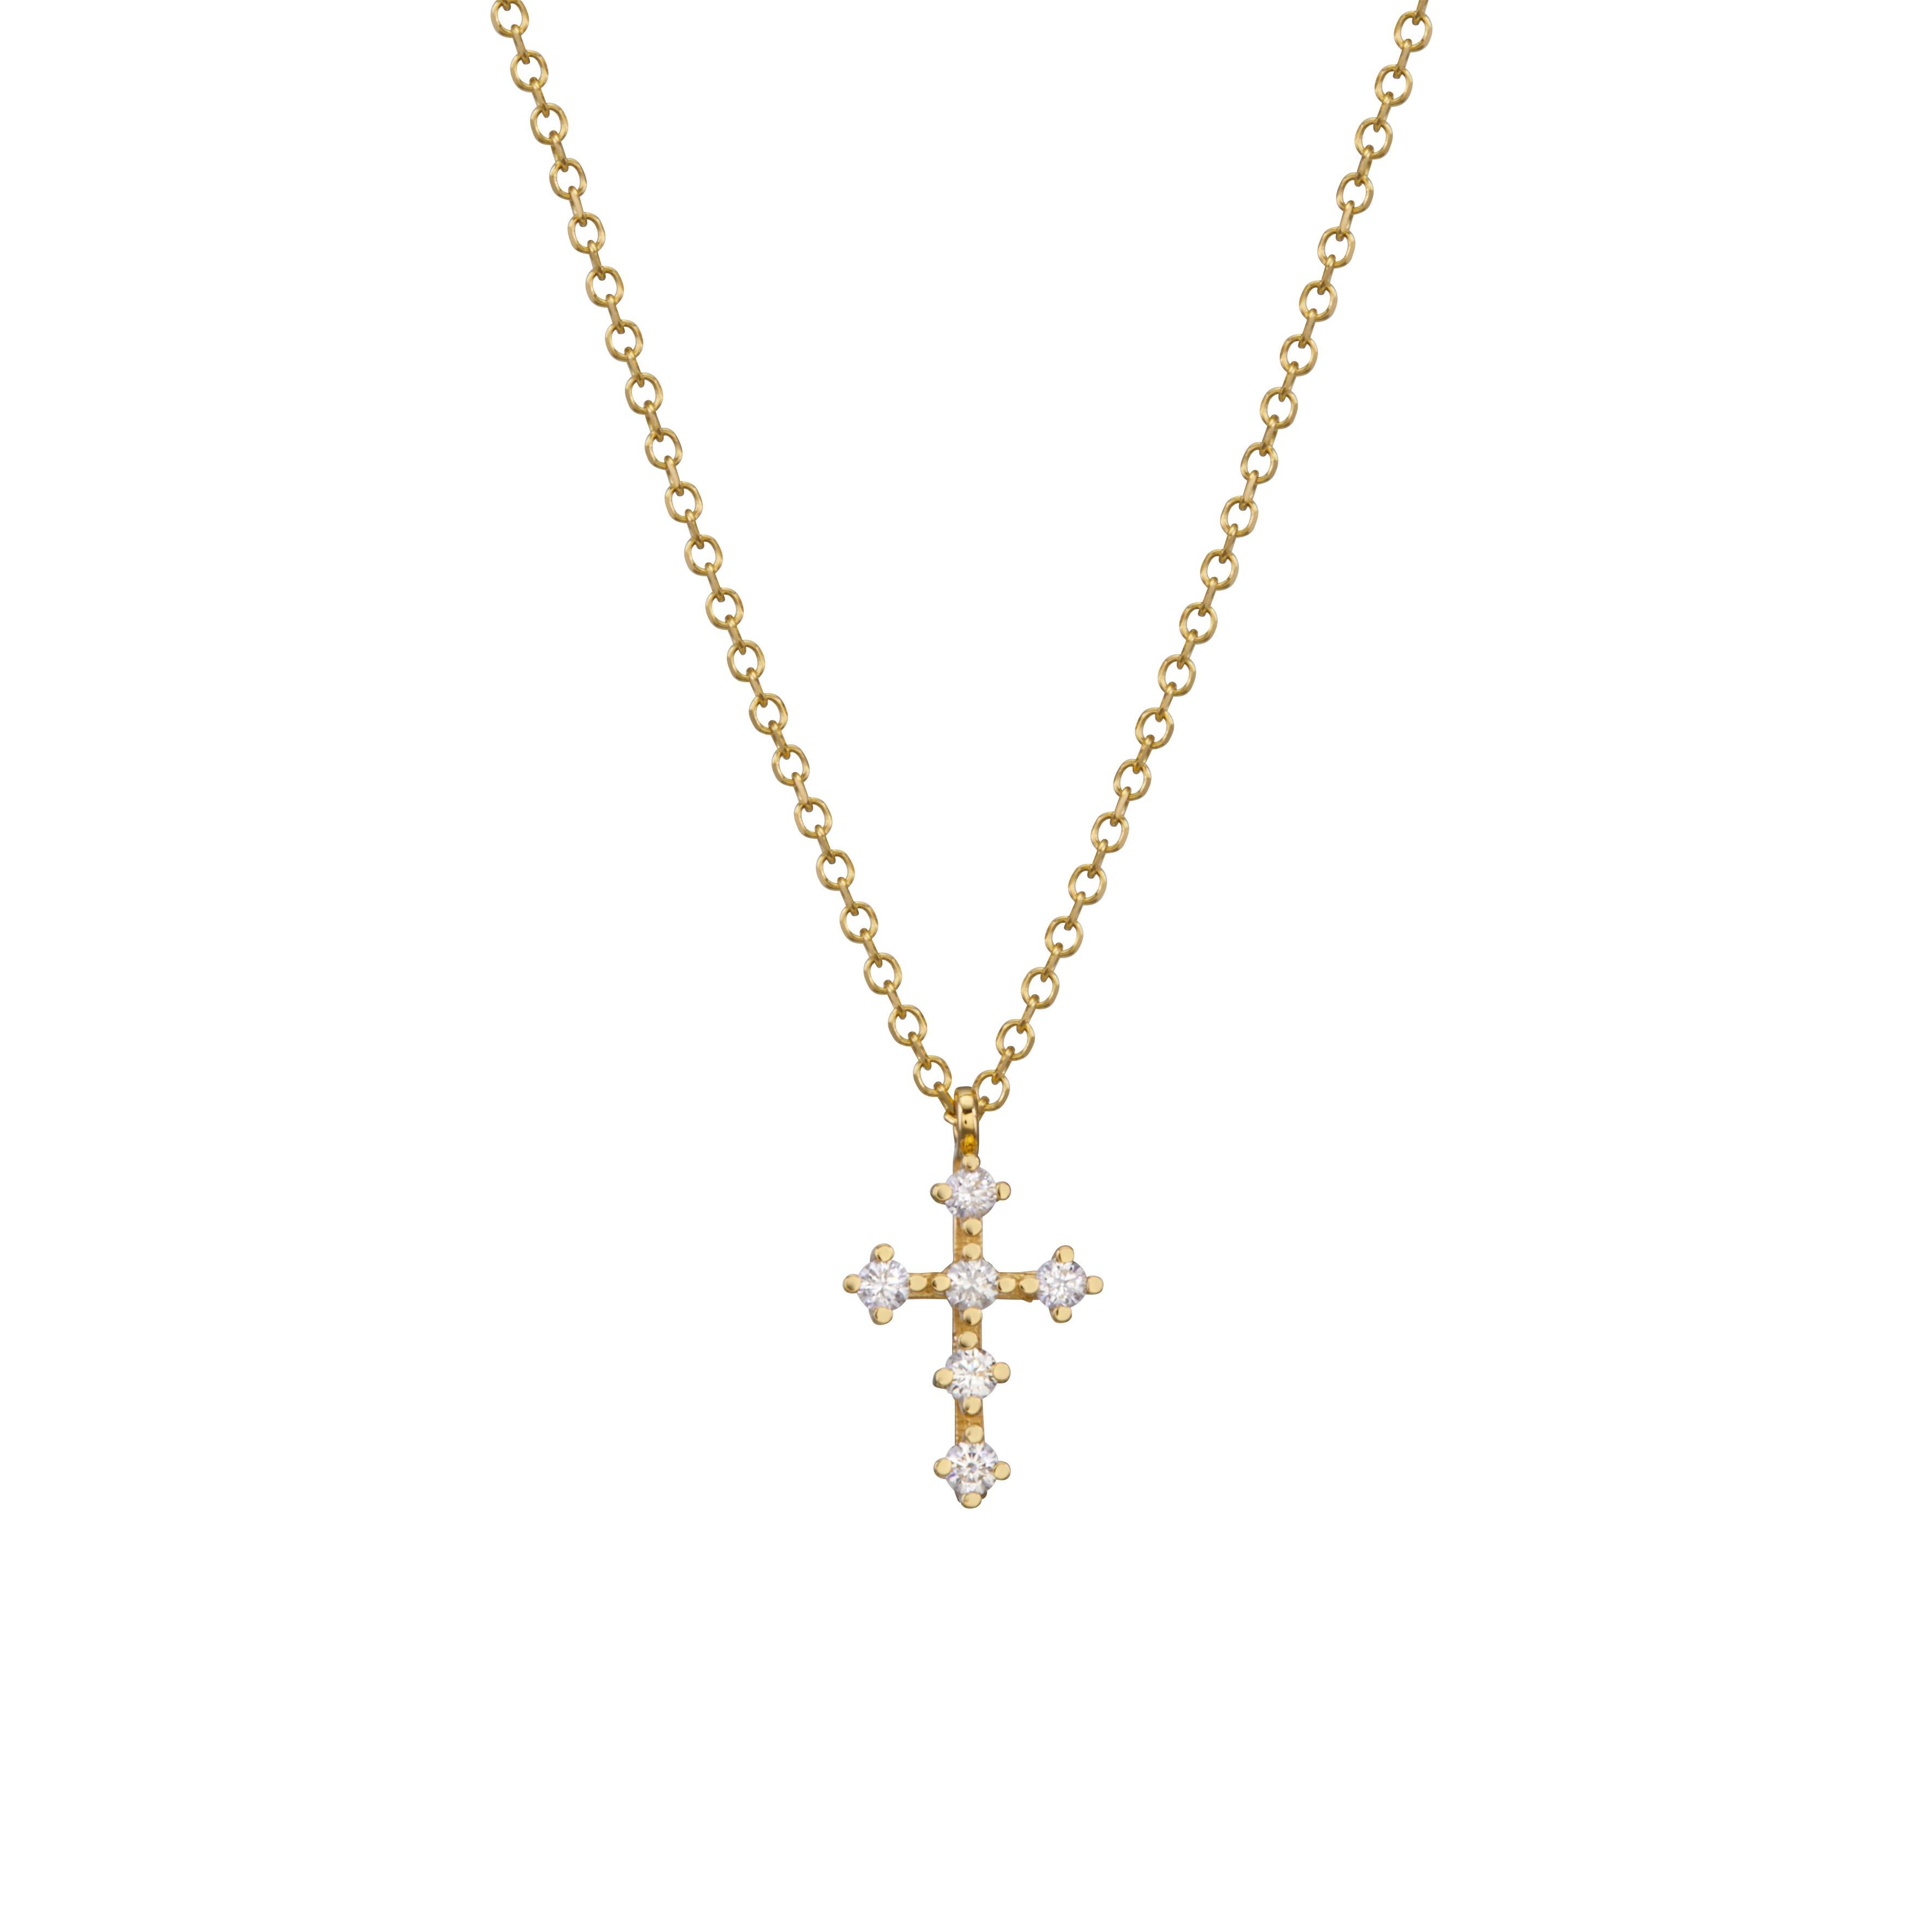 Original, Elegant Mini Cross Pendant wear well with any look. Designed to be comfortable for daily use.
The Cross necklace is handcafted, in 18kt yellow gold with  brillant cut diamonds.
Nice gift for her.

Stone details: Brilliant cut diamond